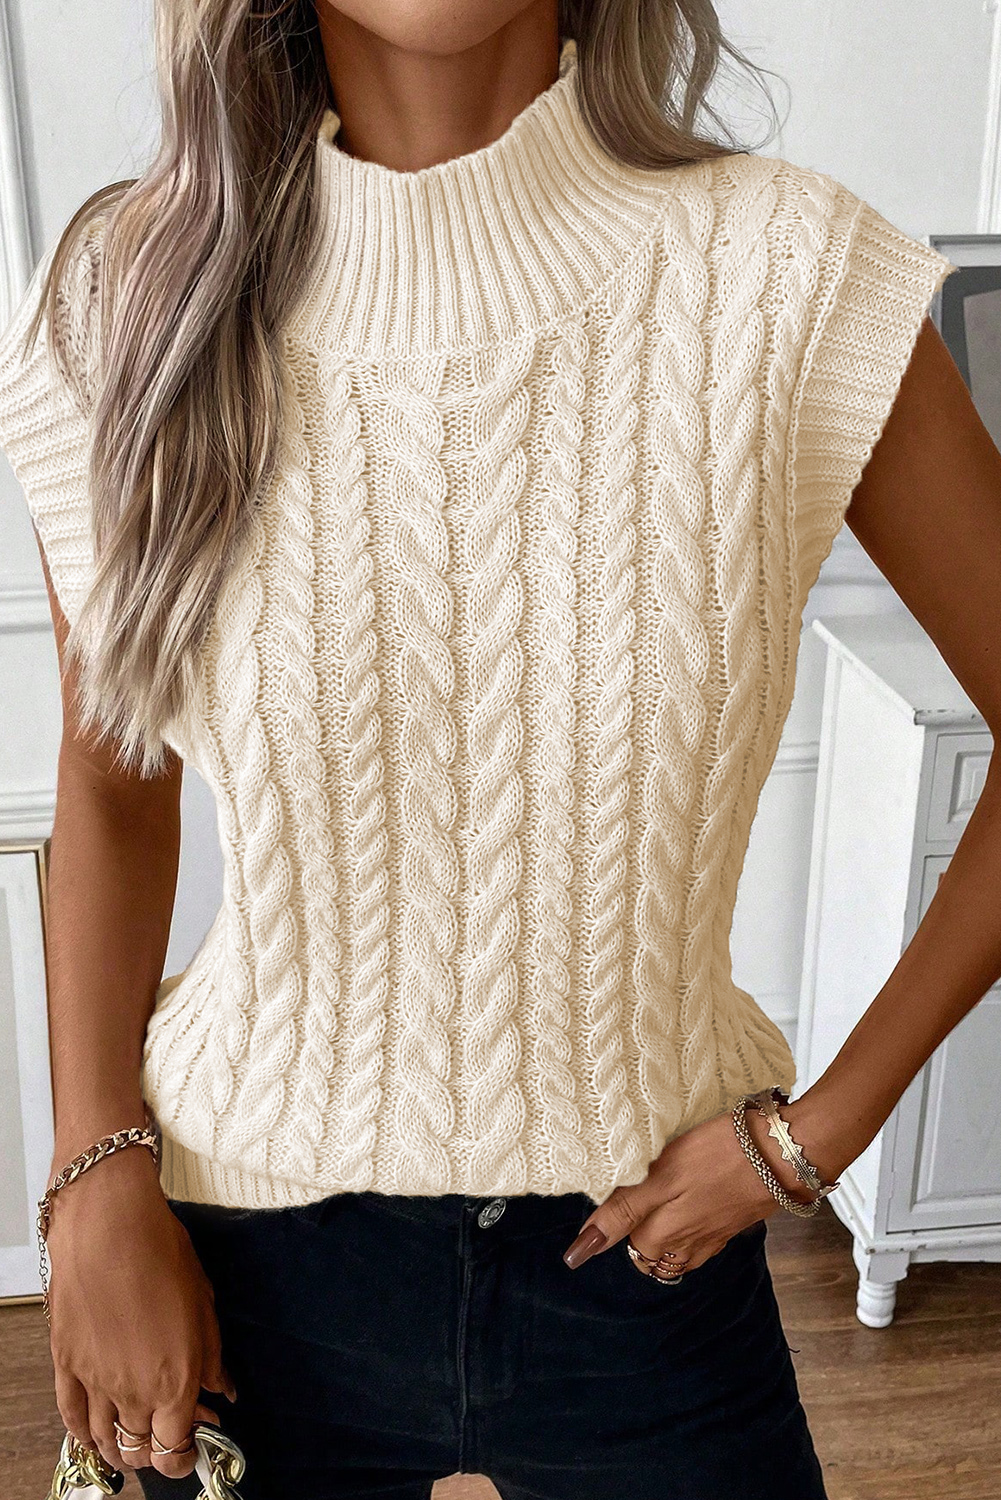 Oatmeal Ribbed Trim High Neck Cable Knit SWEATER Vest